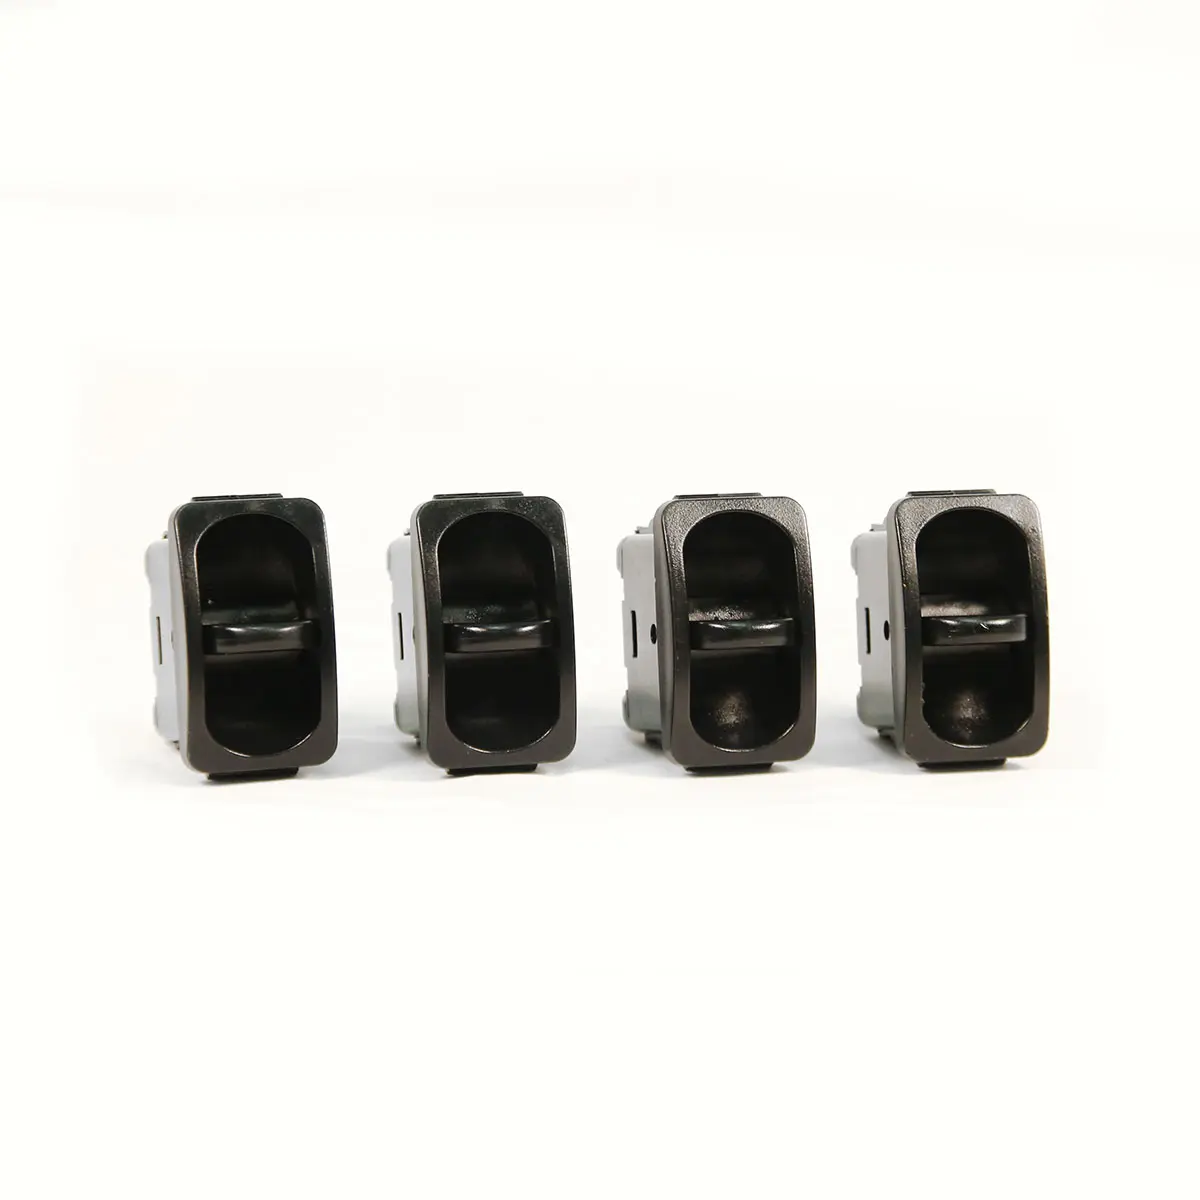 Manual air suspension buttons